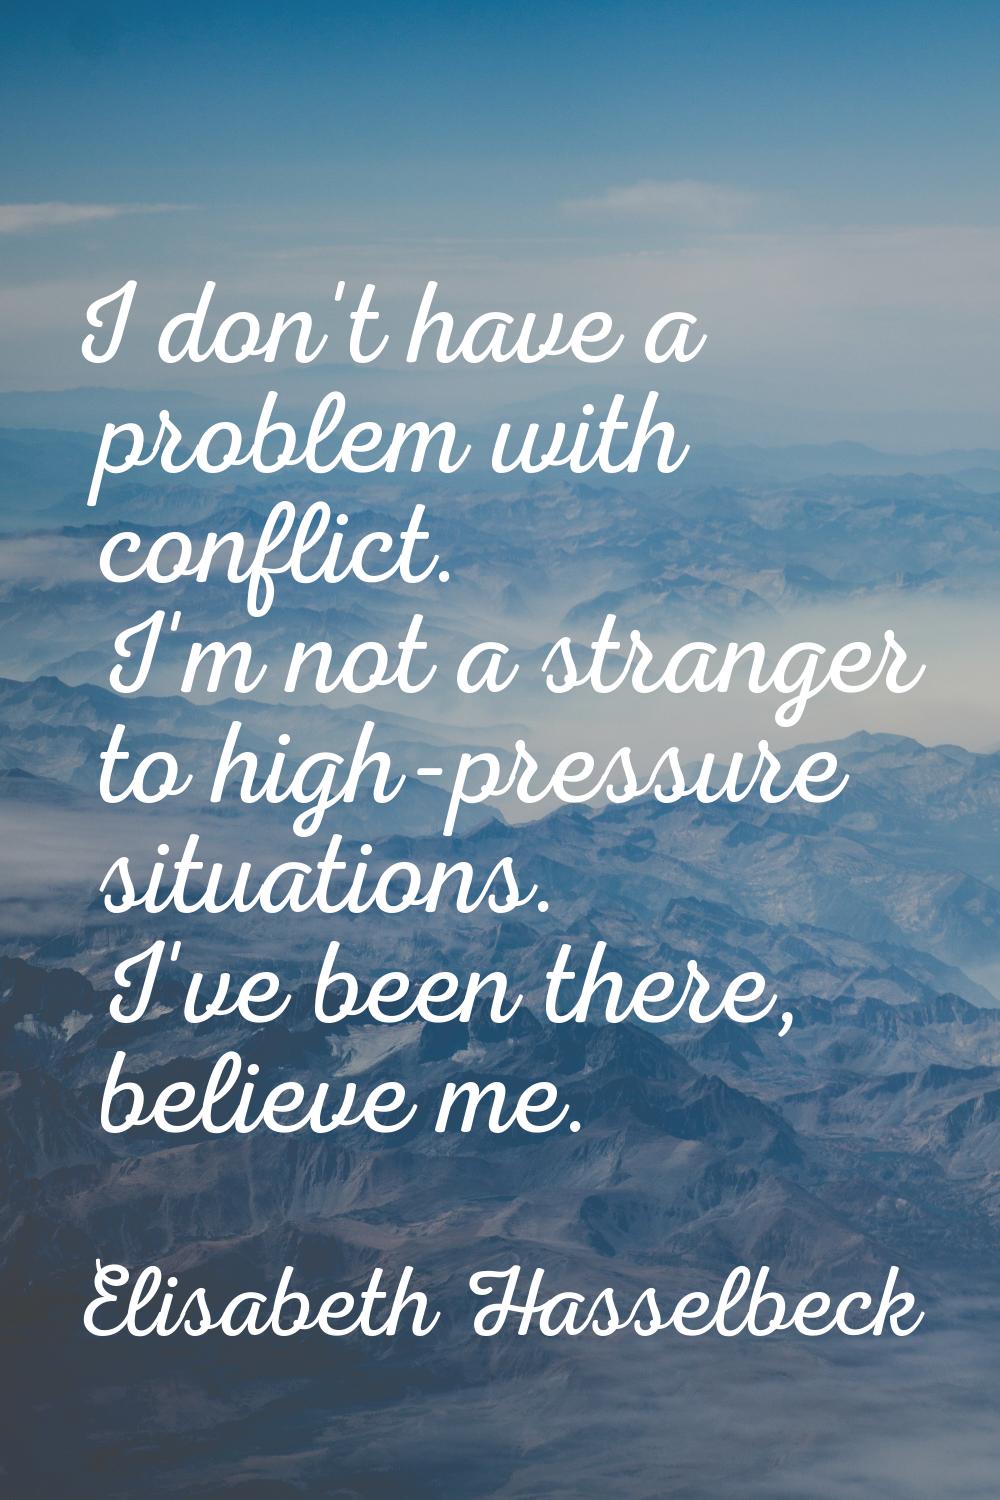 I don't have a problem with conflict. I'm not a stranger to high-pressure situations. I've been the